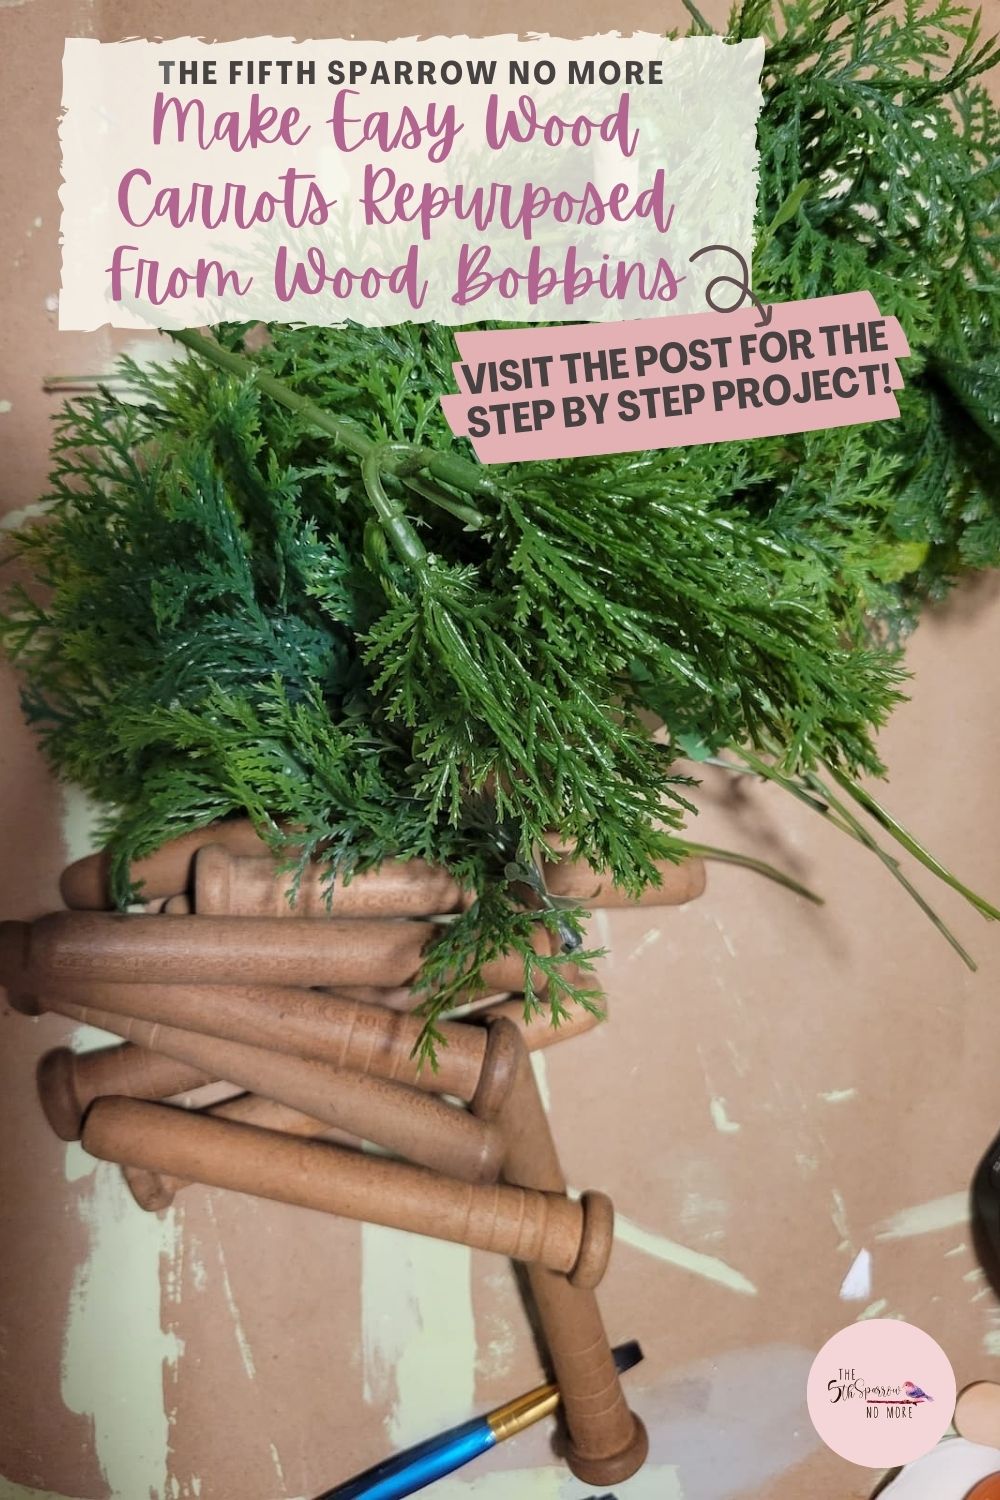 Make easy wood carrots repurposed from wood bobbins in this Easter craft. Use paint and greenery to transform vintage wood pieces into carrots.